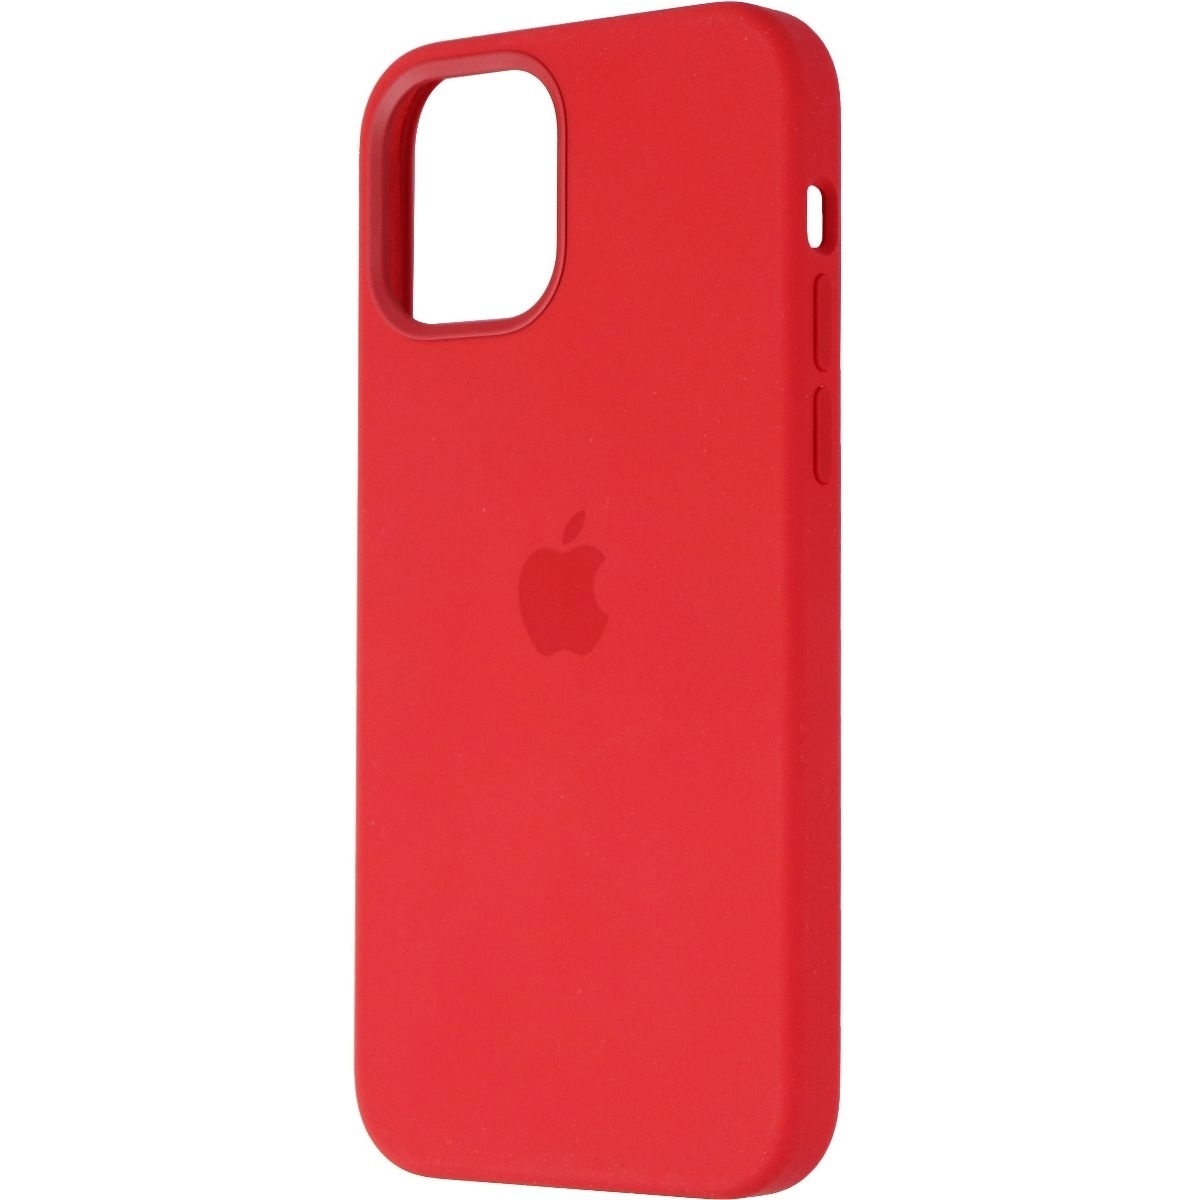 Apple Silicone Case For MagSafe For IPhone 12 Pro And IPhone 12 - Red